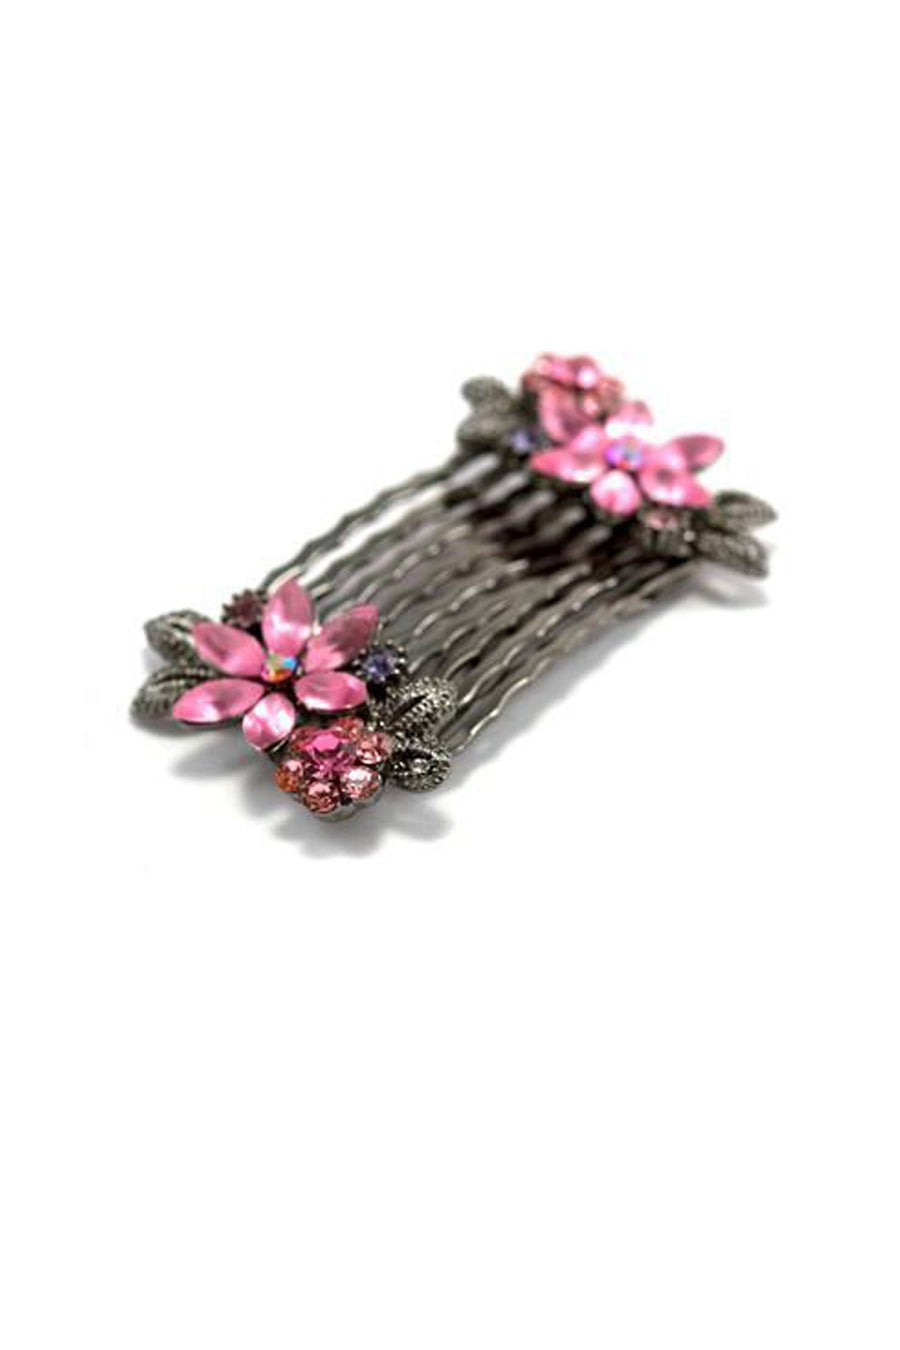 Frosted Flowers Hair Comb (Pair) -  Hair Comb, Soho Style